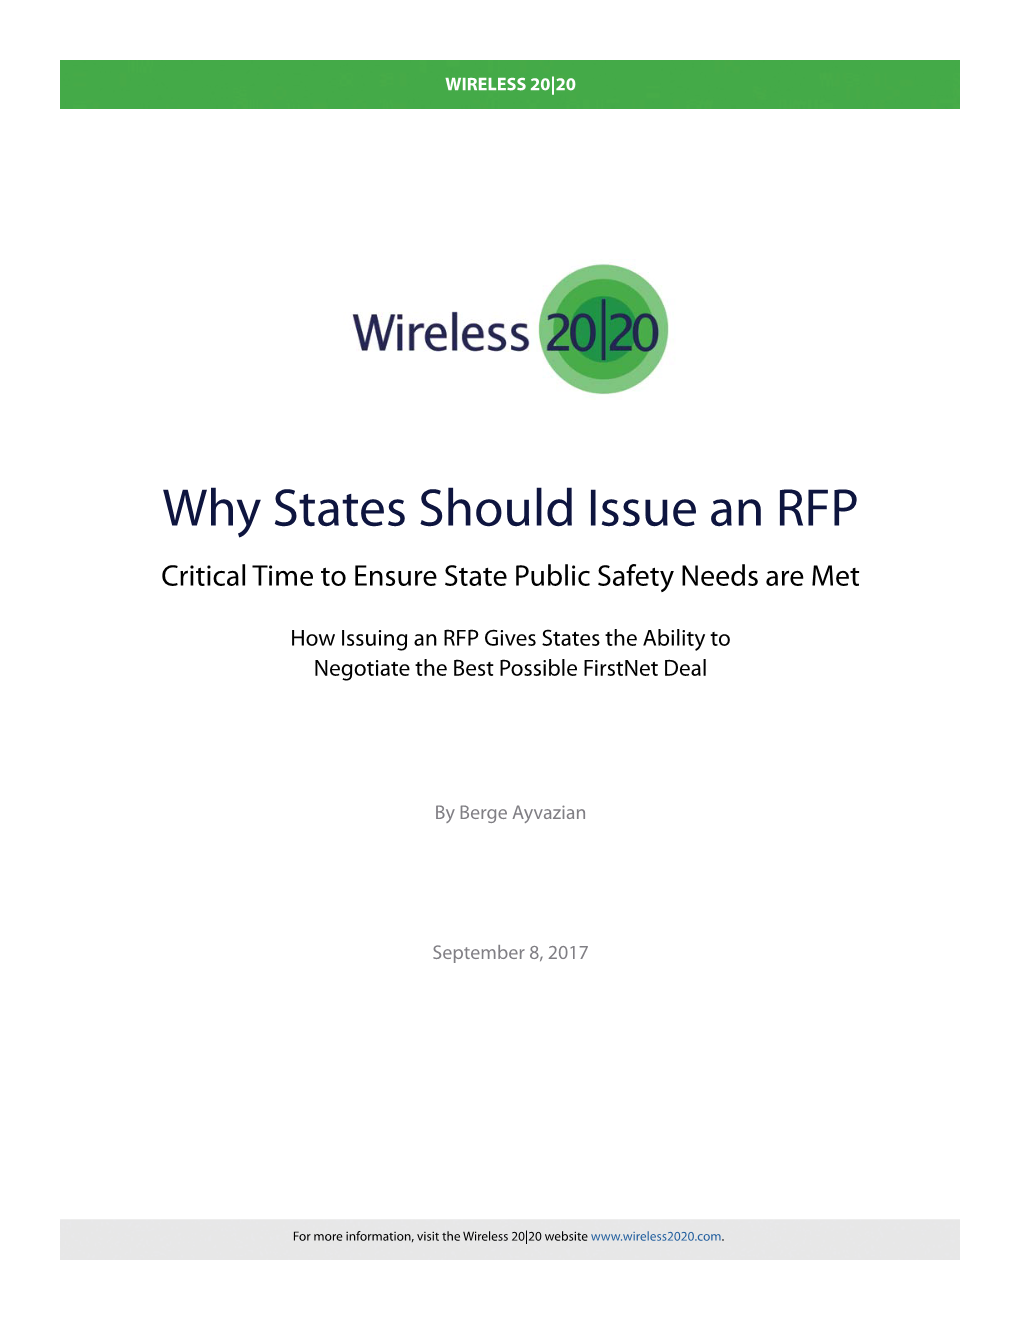 Why States Should Issue an RFP Critical Time to Ensure State Public Safety Needs Are Met